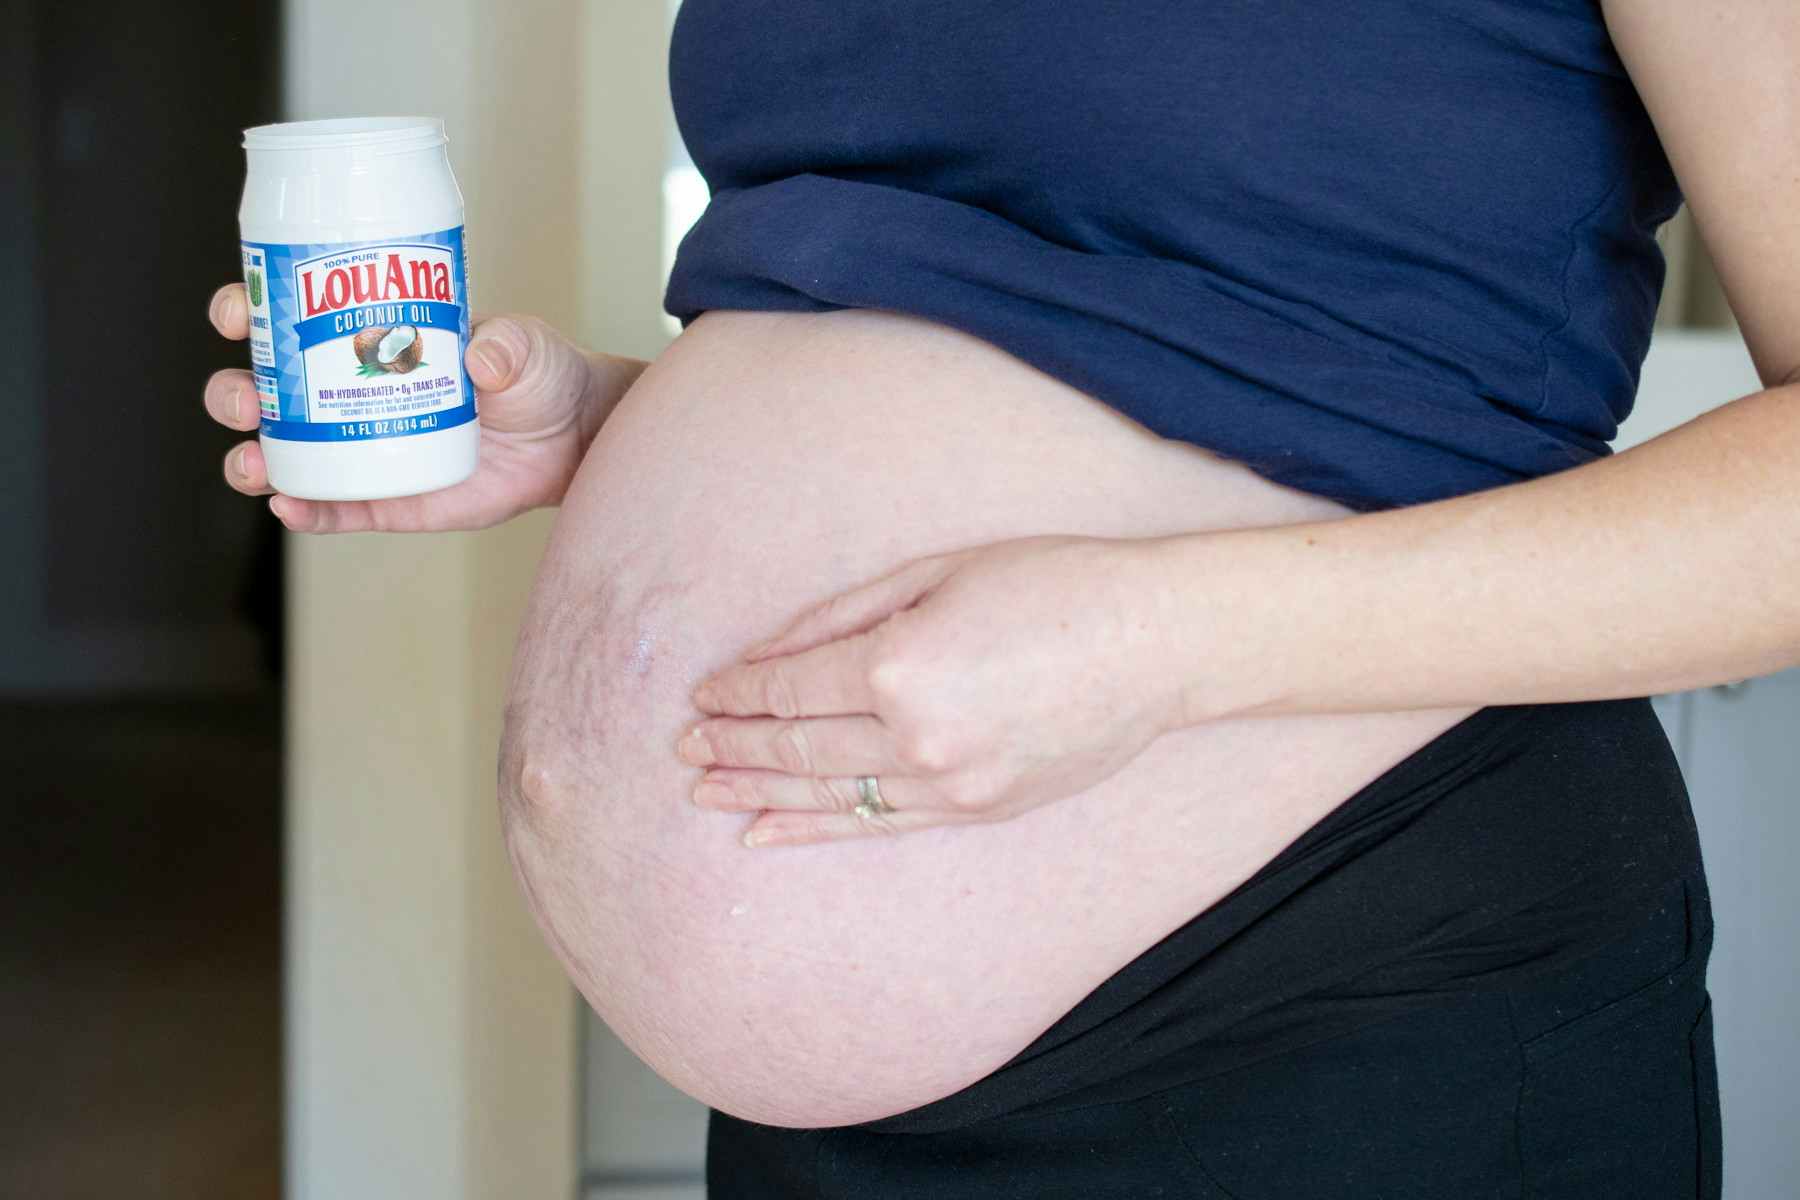 A pregnant woman rubbing coconut oil onto her stomach.